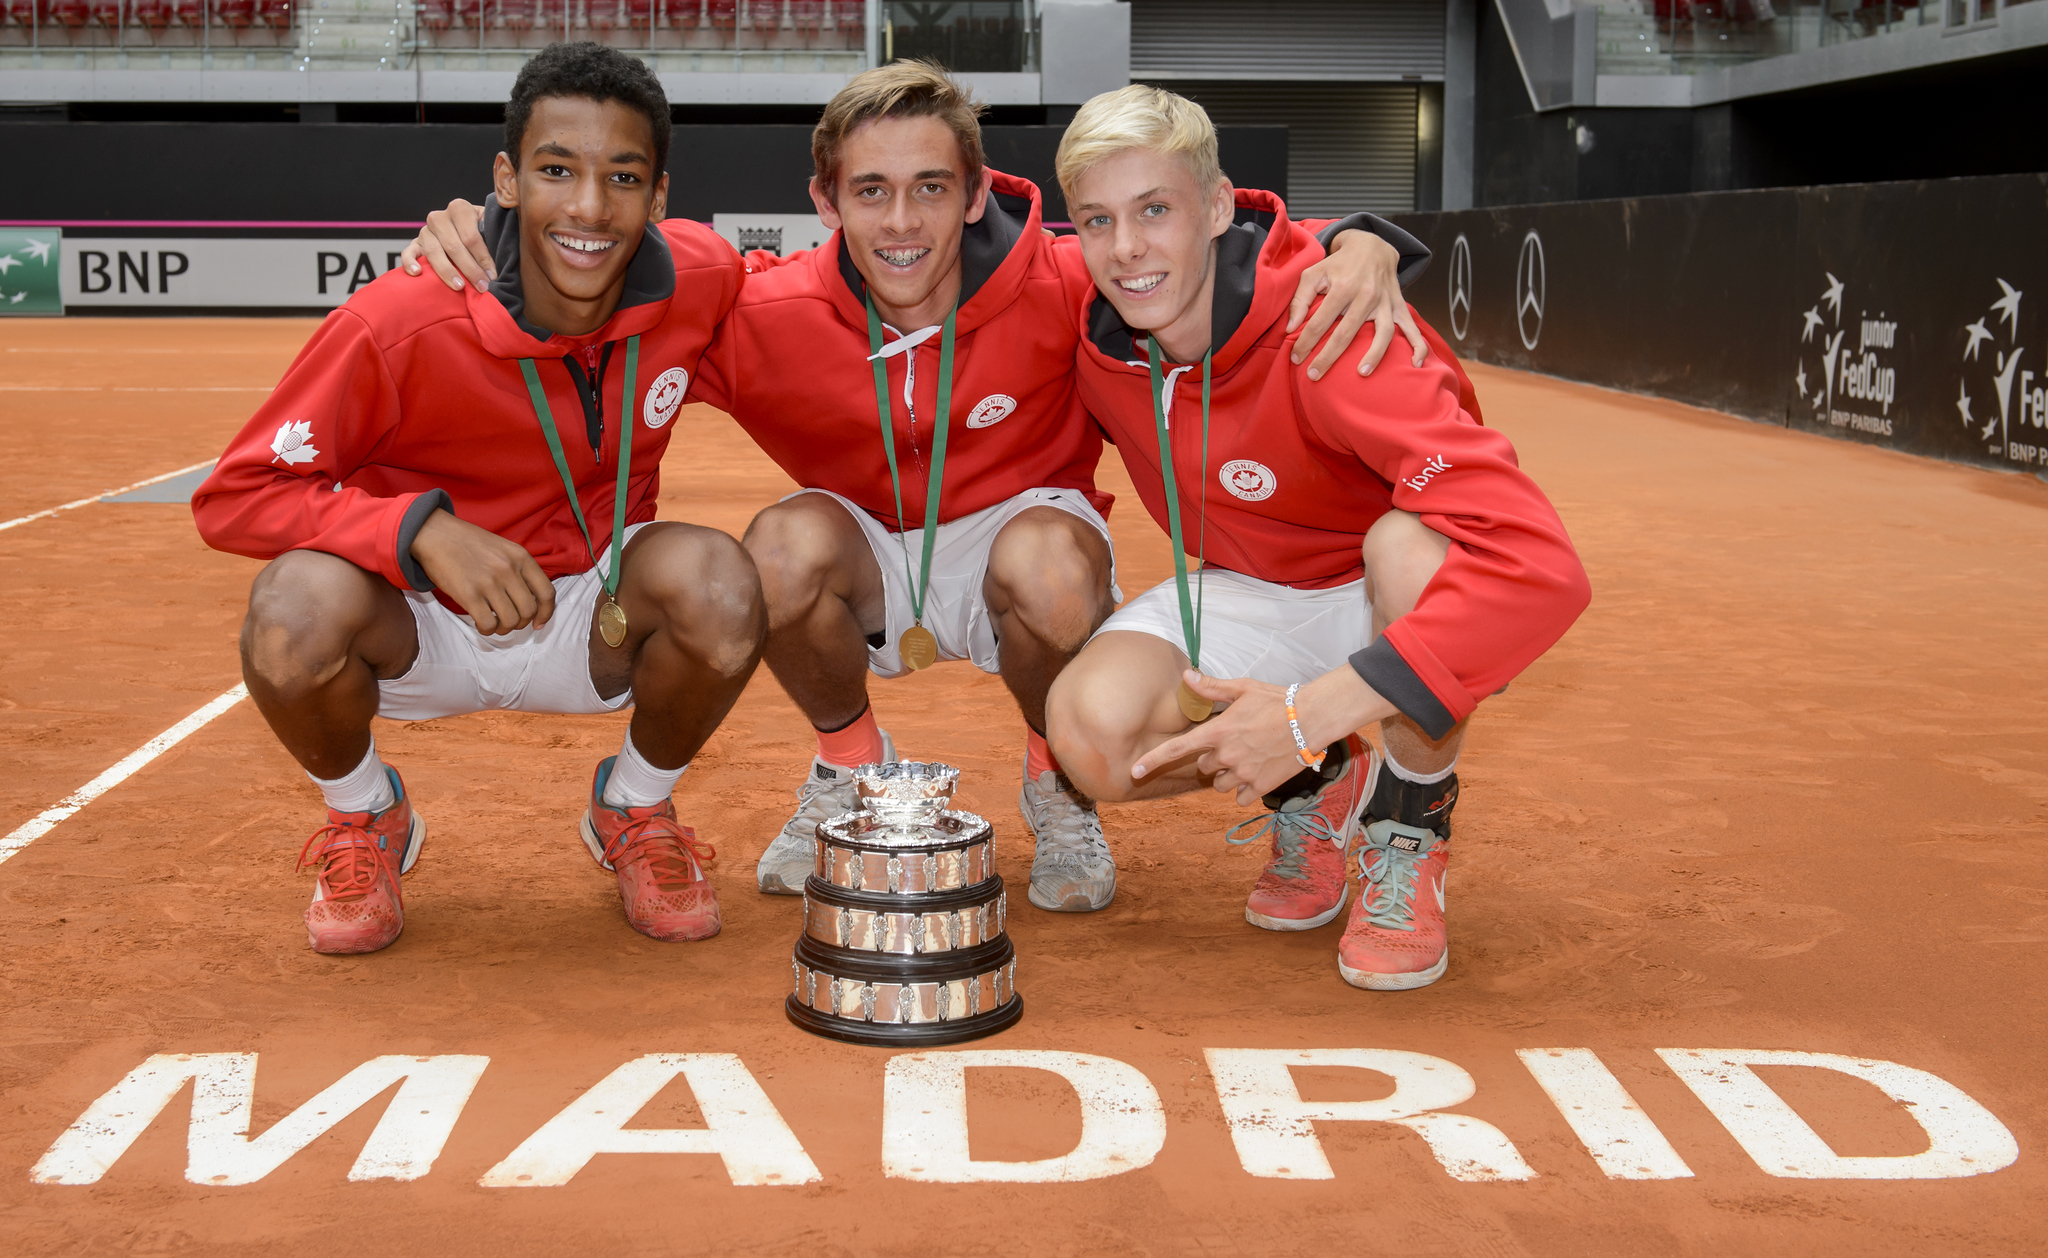 Aliassime's Canada beat Australia to win their first Davis Cup